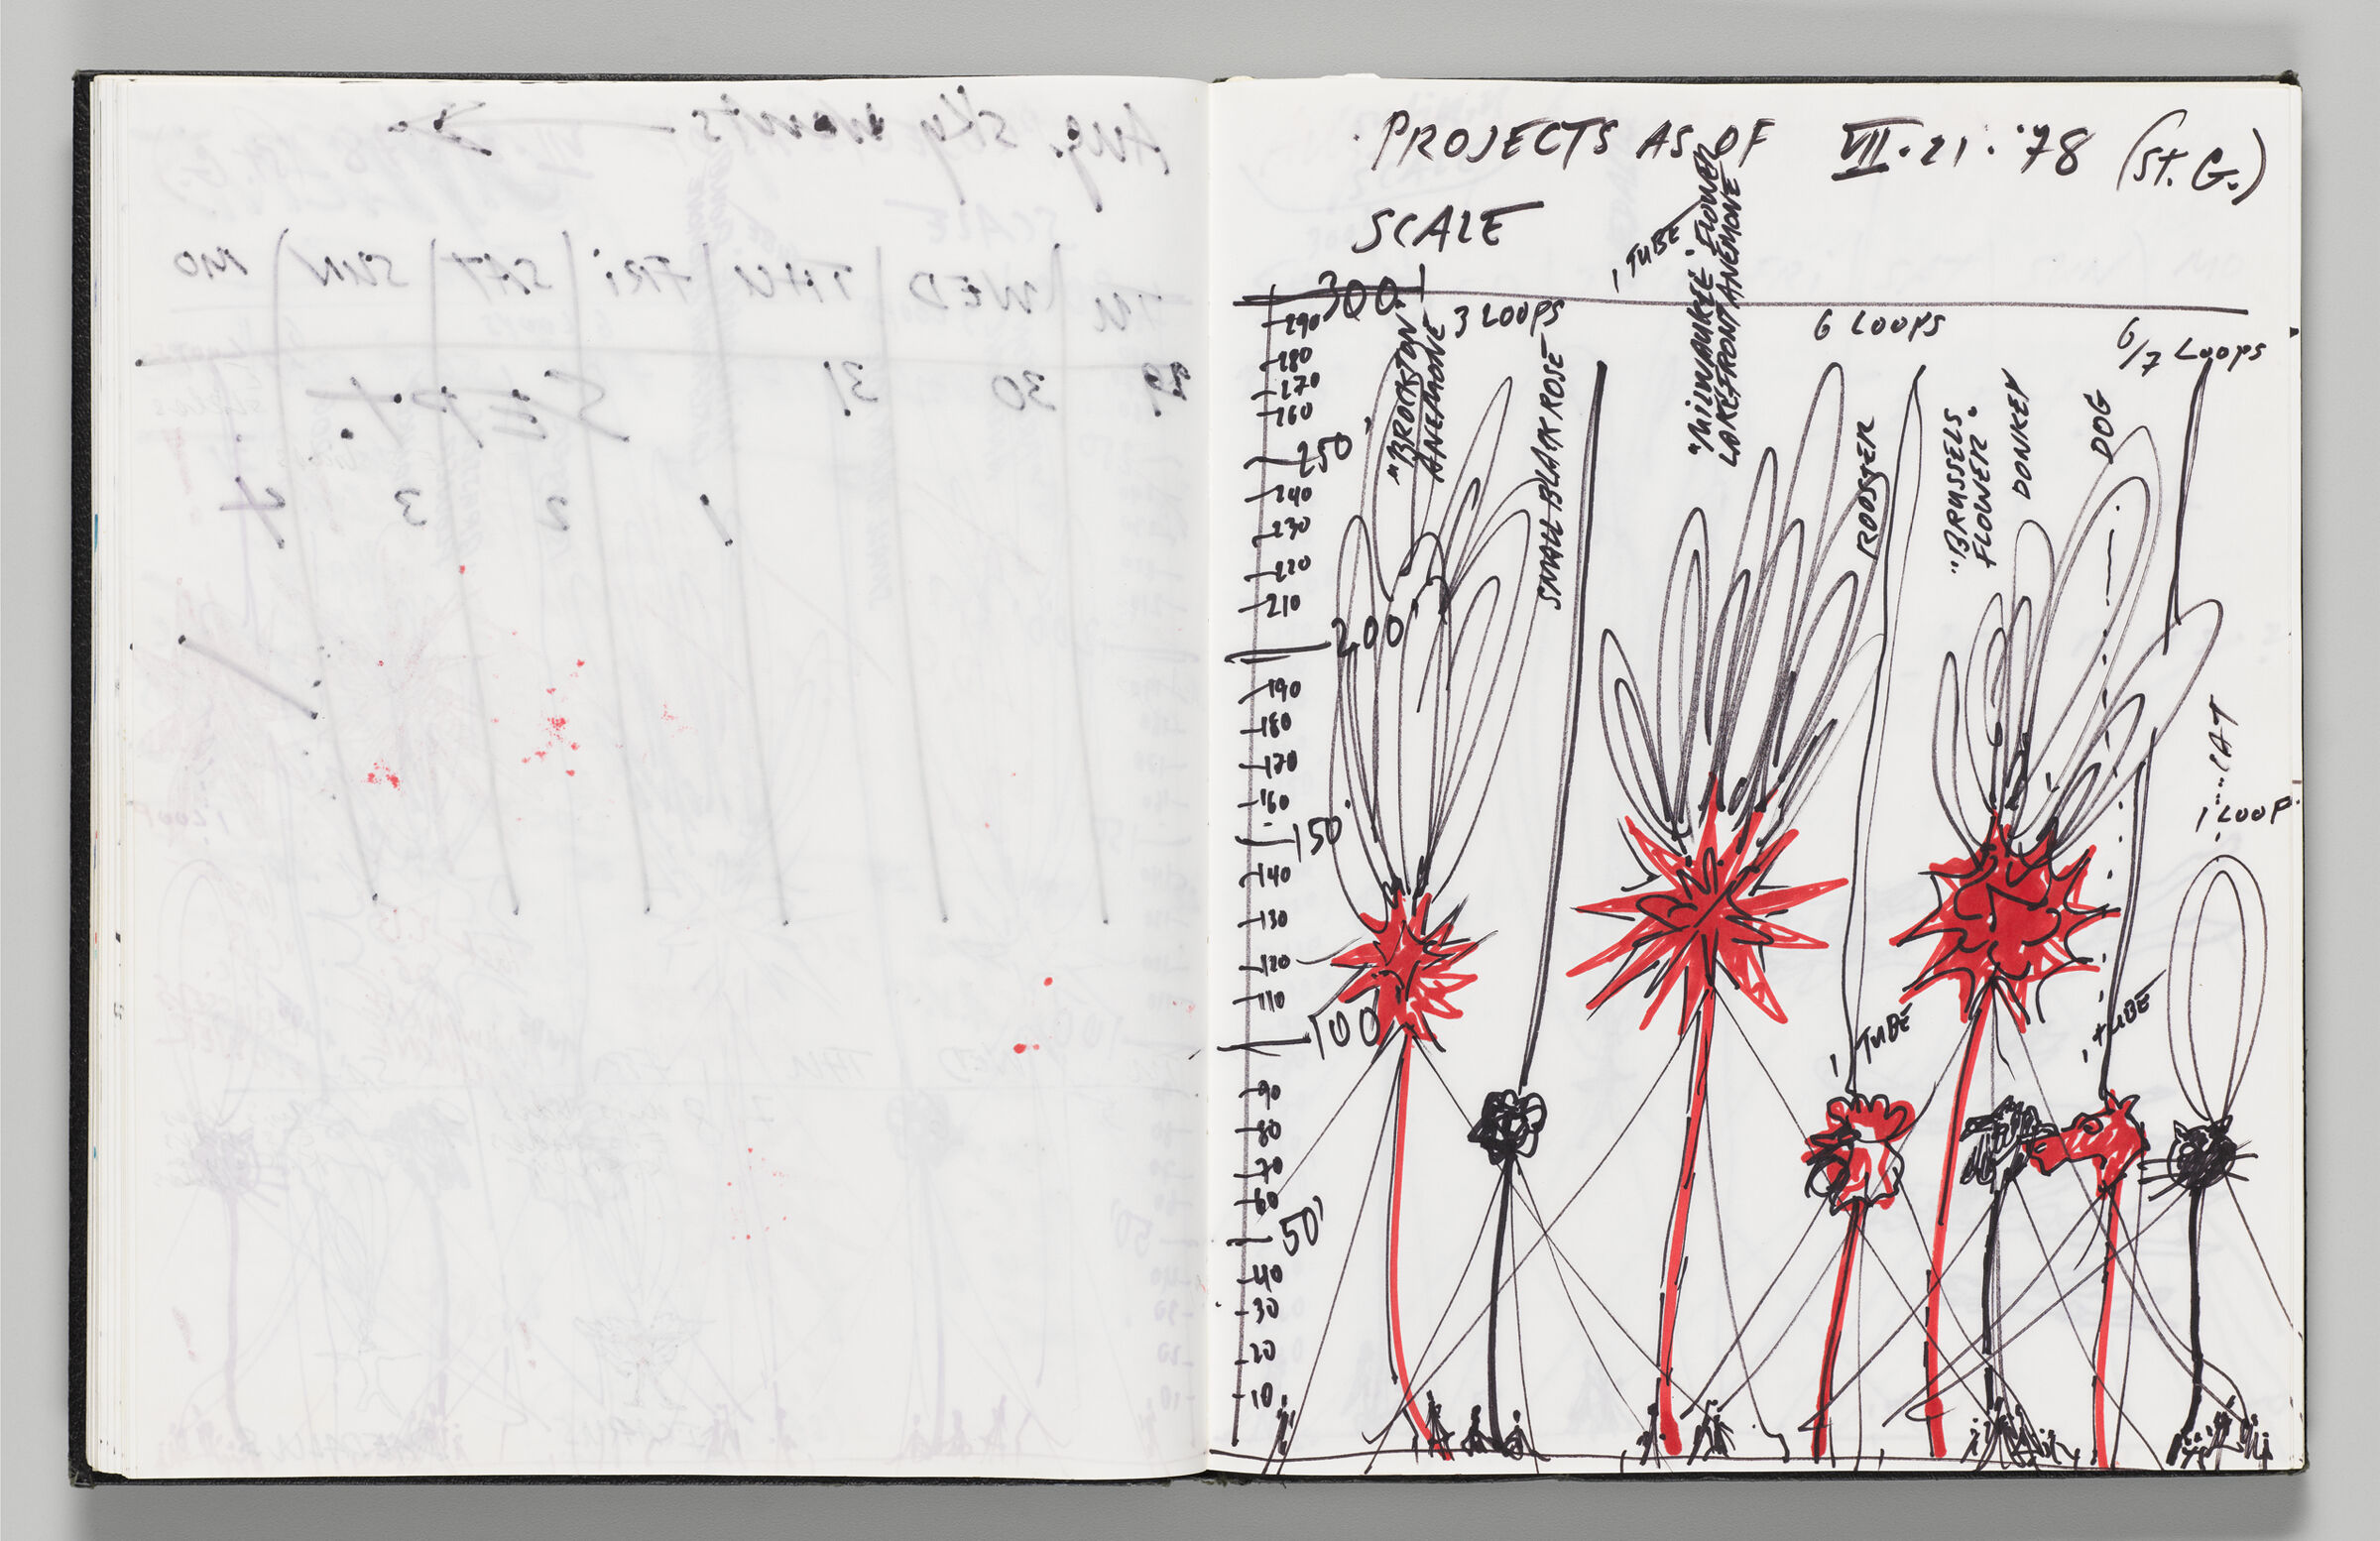 Untitled (Bleed-Through Of Previous Page And Color Transfer, Left Page); Untitled (Scale Of Inflatable Projects, Right Page)